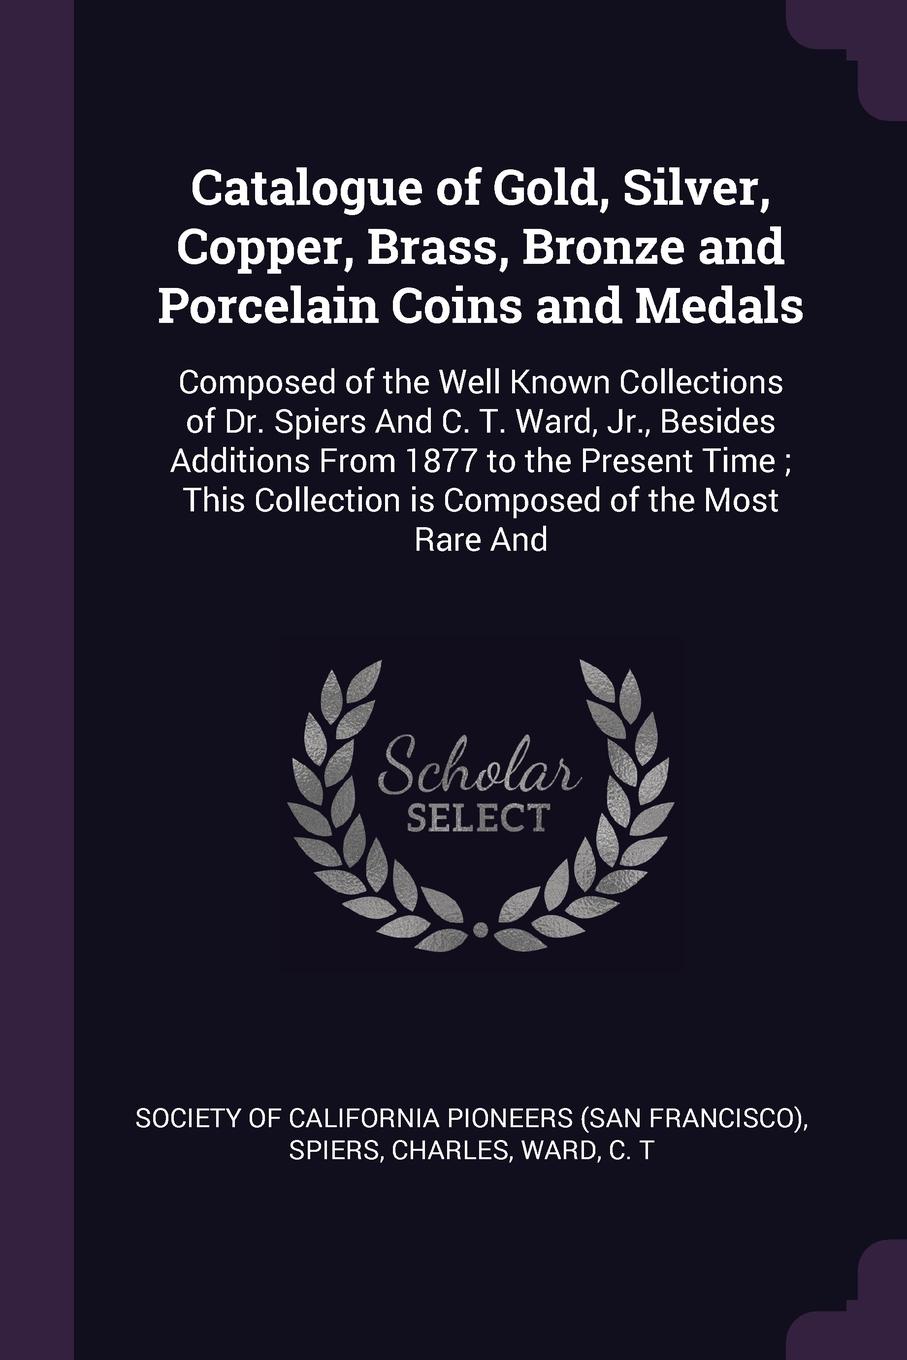 Catalogue of Gold, Silver, Copper, Brass, Bronze and Porcelain Coins and Medals. Composed of the Well Known Collections of Dr. Spiers And C. T. Ward, Jr., Besides Additions From 1877 to the Present Time ; This Collection is Composed of the Most Ra...